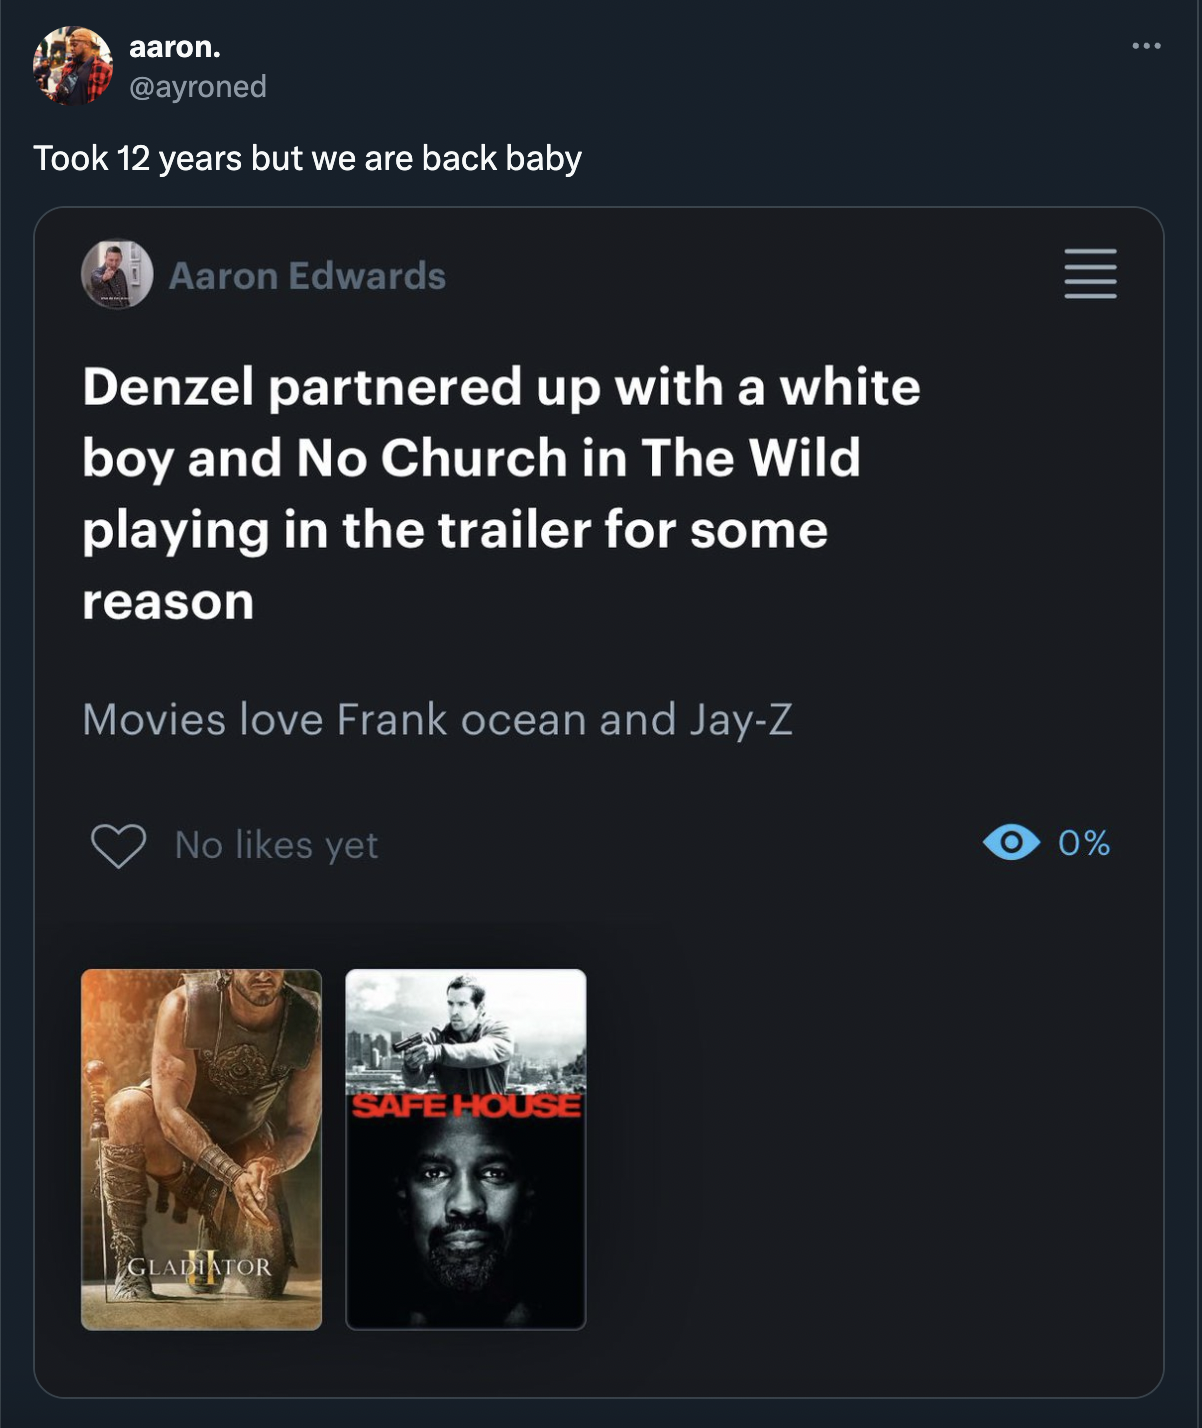 screenshot - aaron. Took 12 years but we are back baby Aaron Edwards Denzel partnered up with a white boy and No Church in The Wild playing in the trailer for some reason Movies love Frank ocean and JayZ No yet Claufor Safe 0%